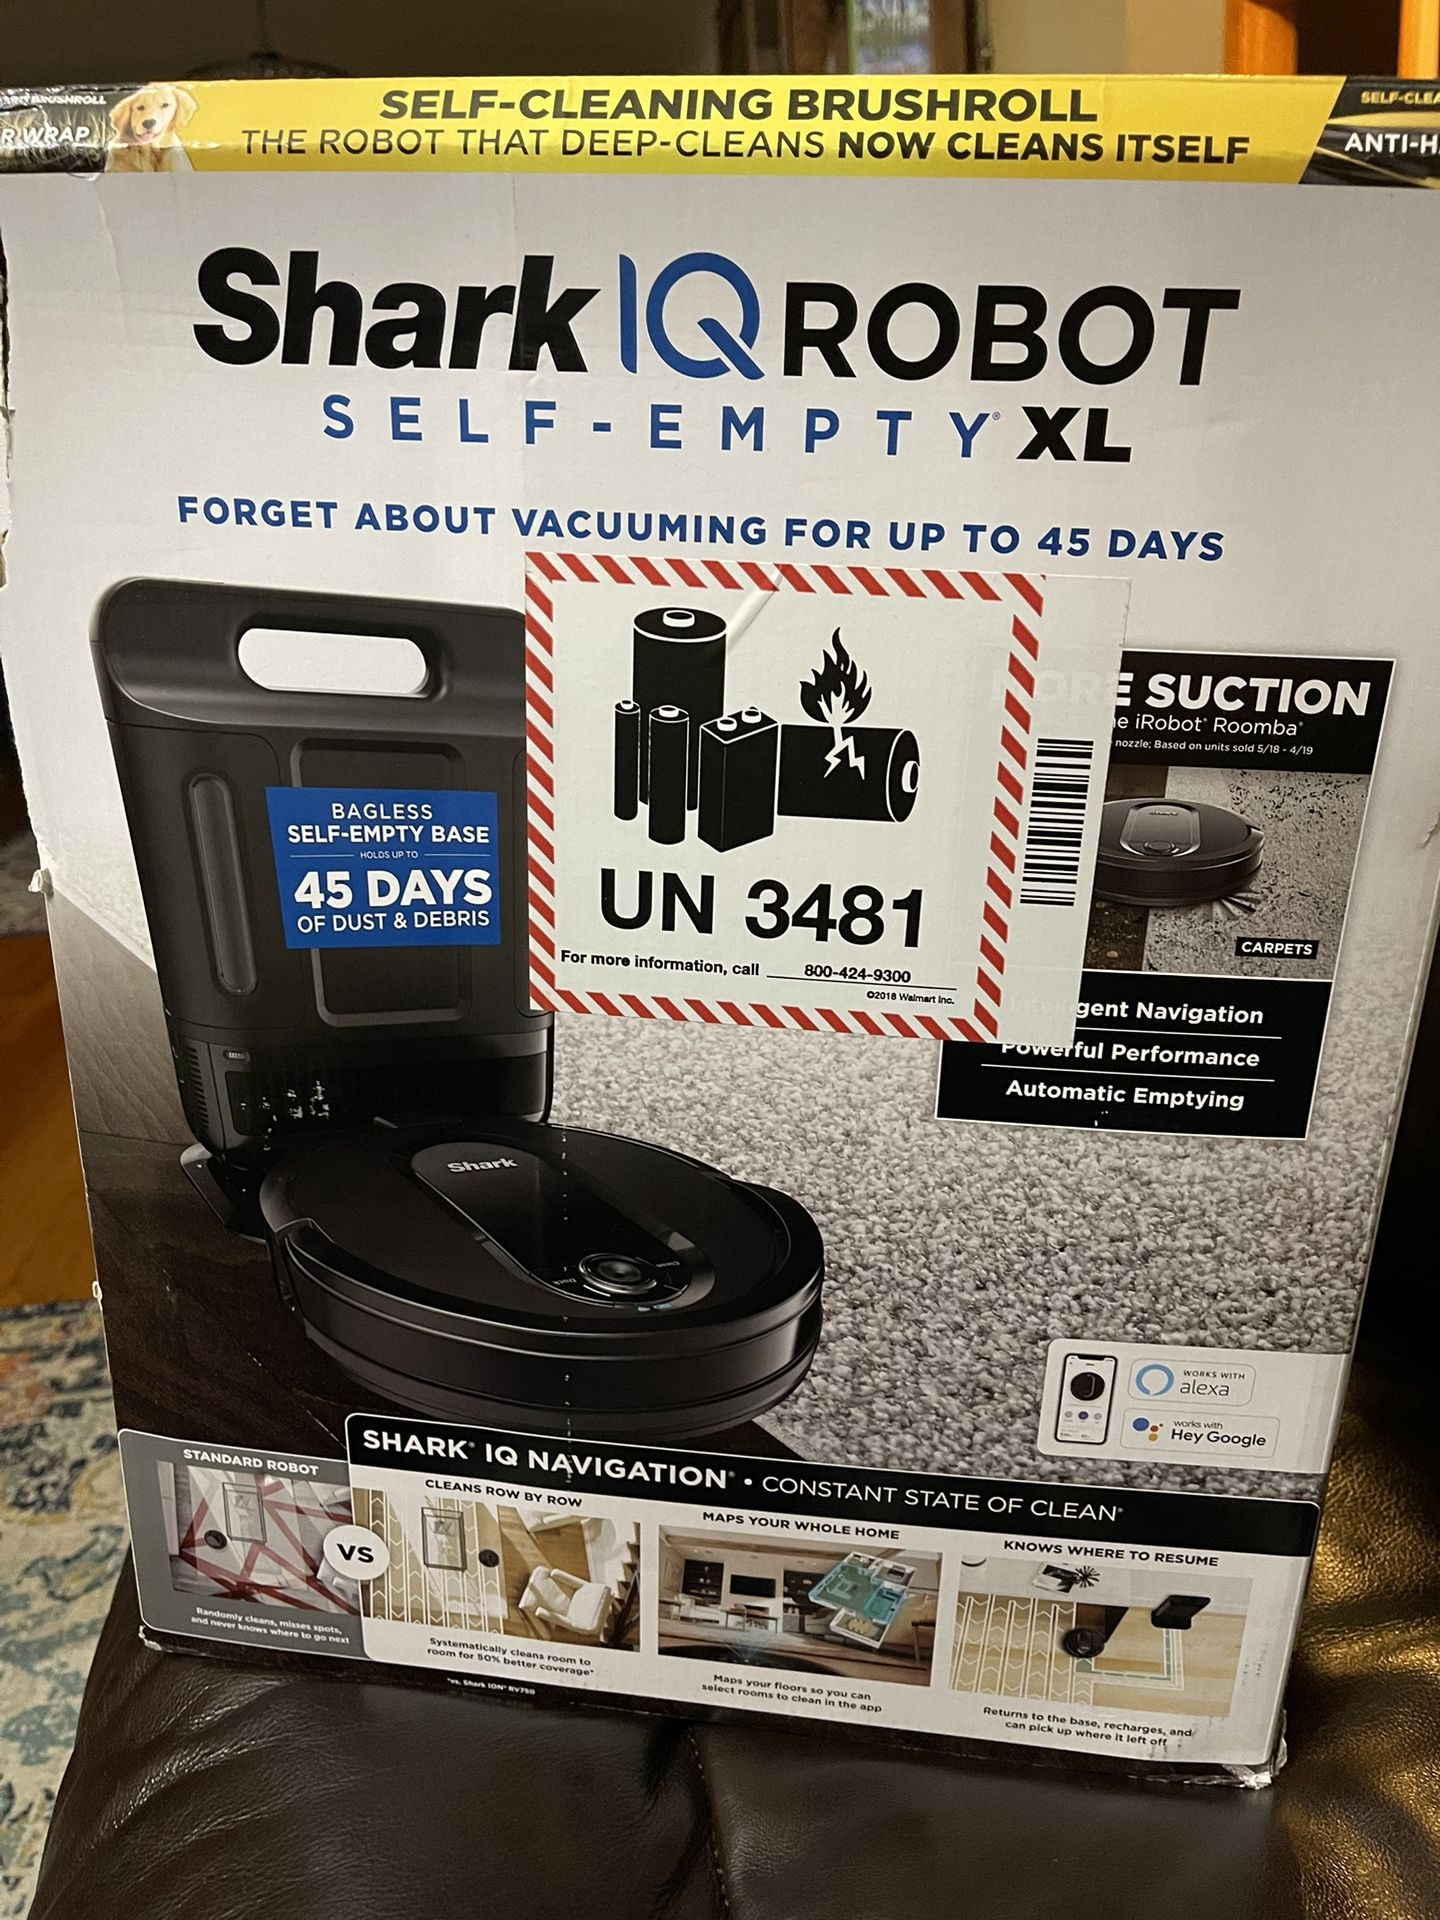 Shark RV1001AE IQ Robot Self-Empty XL, Robot Vacuum with IQ Navigation, Home Mapping, Self-Cleaning Brushroll, Wi-Fi Connected, Works with Alexa, Blac